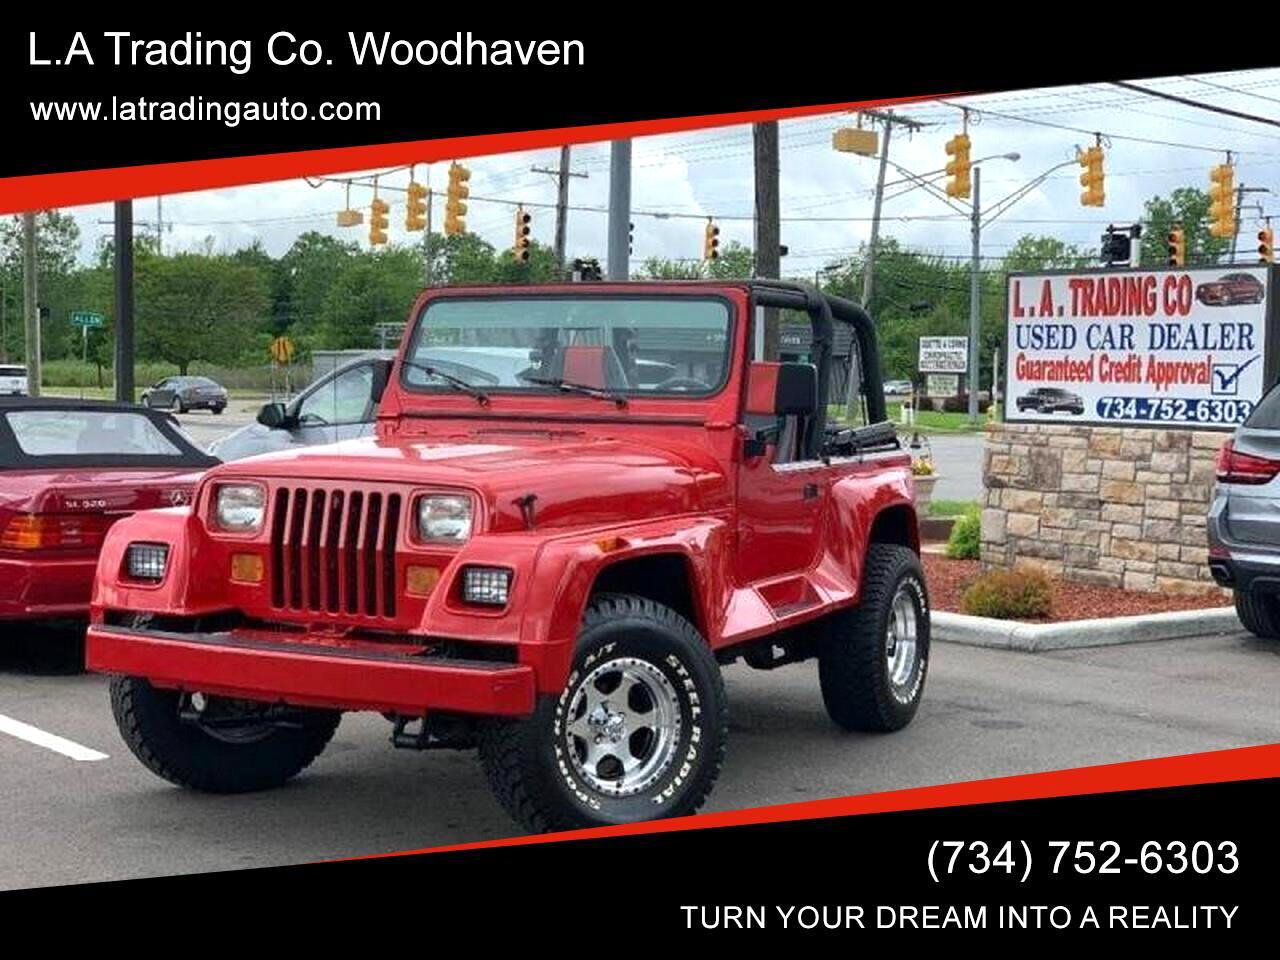 Used 1992 Jeep Wrangler for Sale Right Now - Autotrader